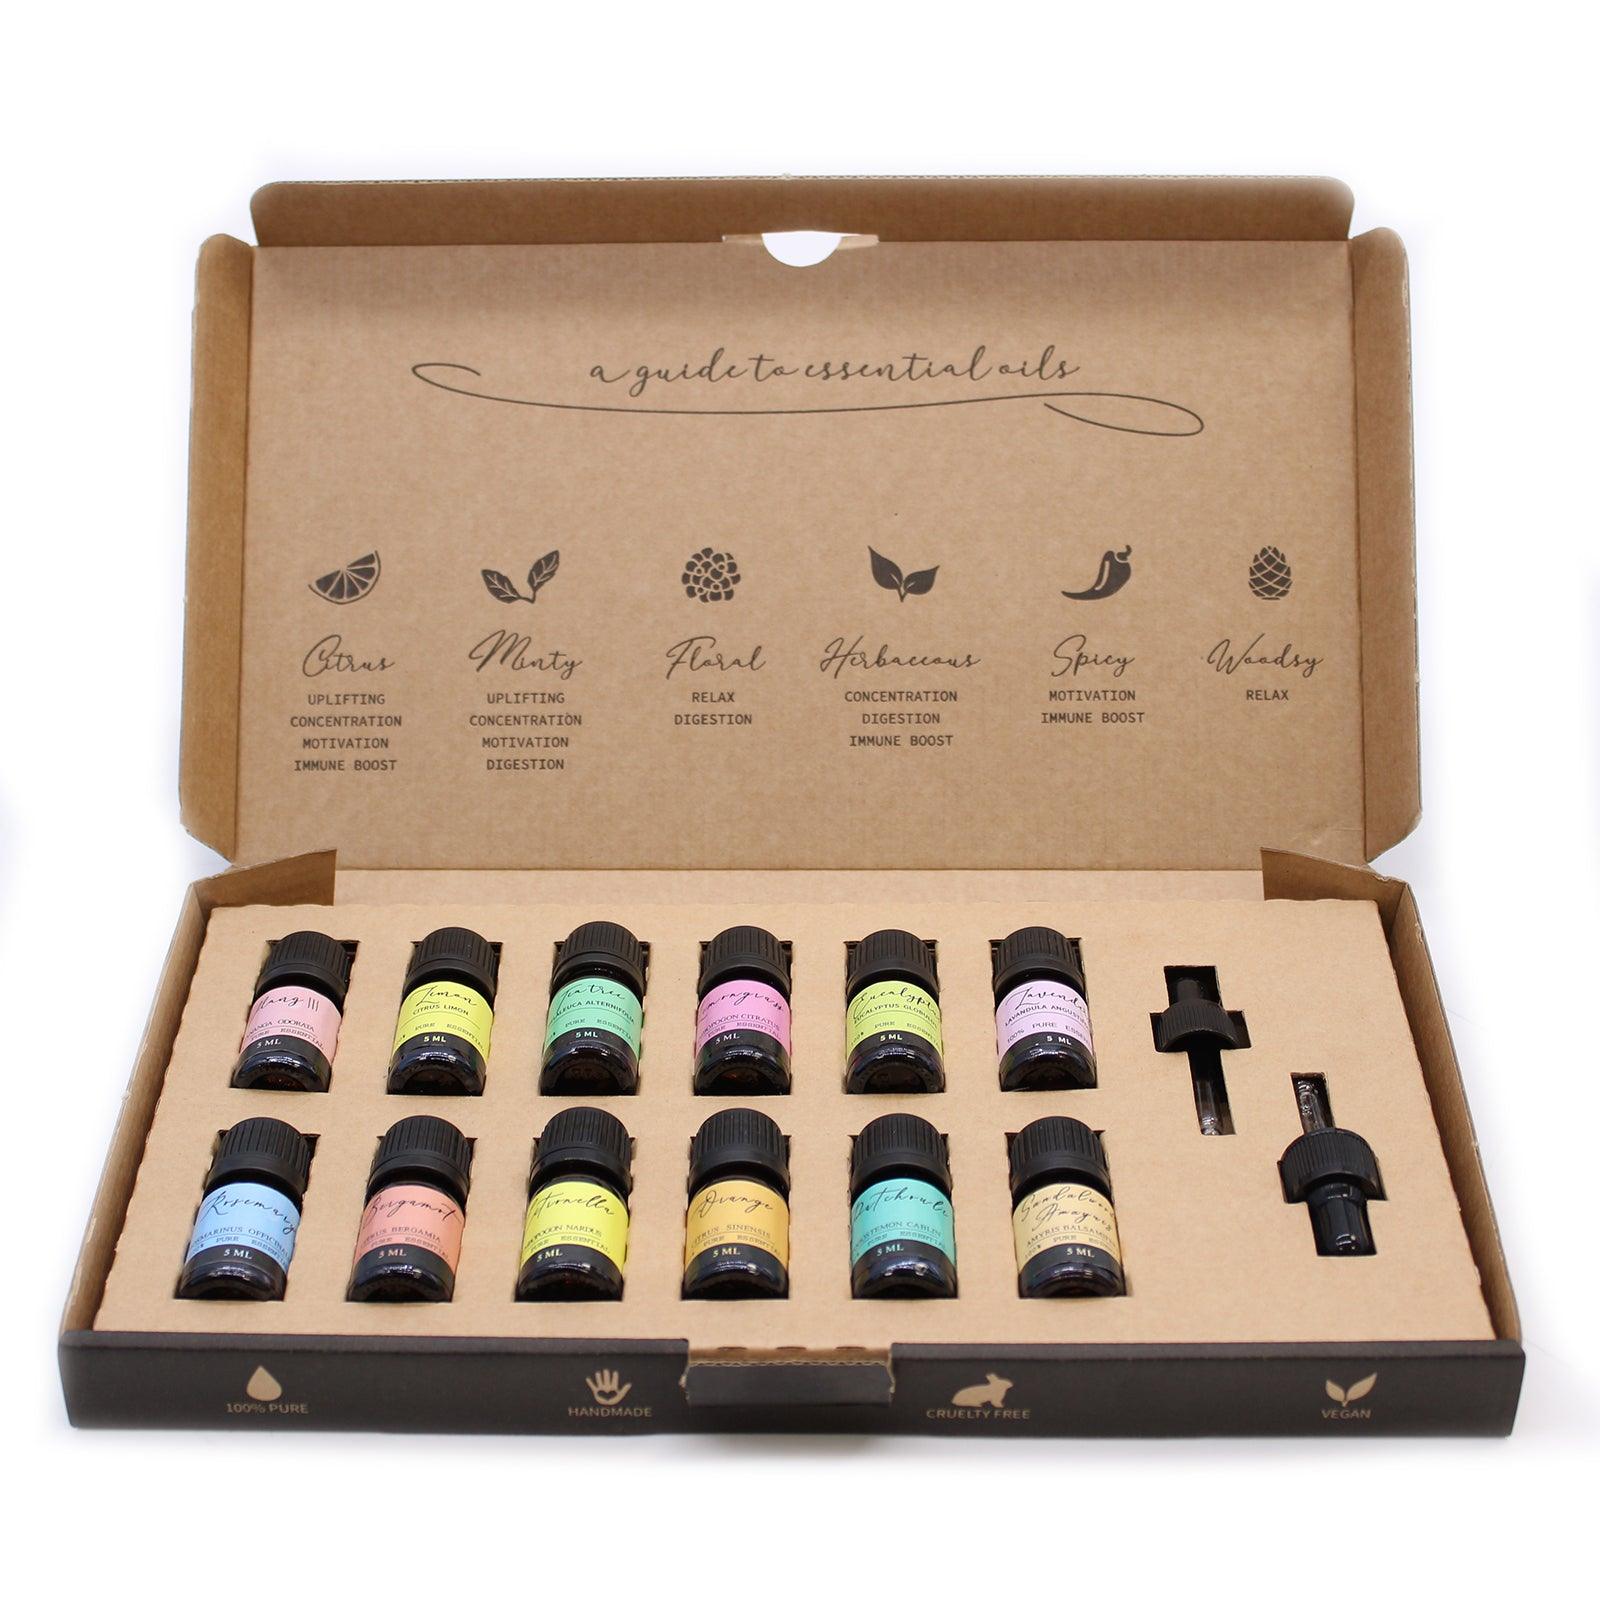 Aromatherapy Essential Oil Set - The Top 12 - DuvetDay.co.uk